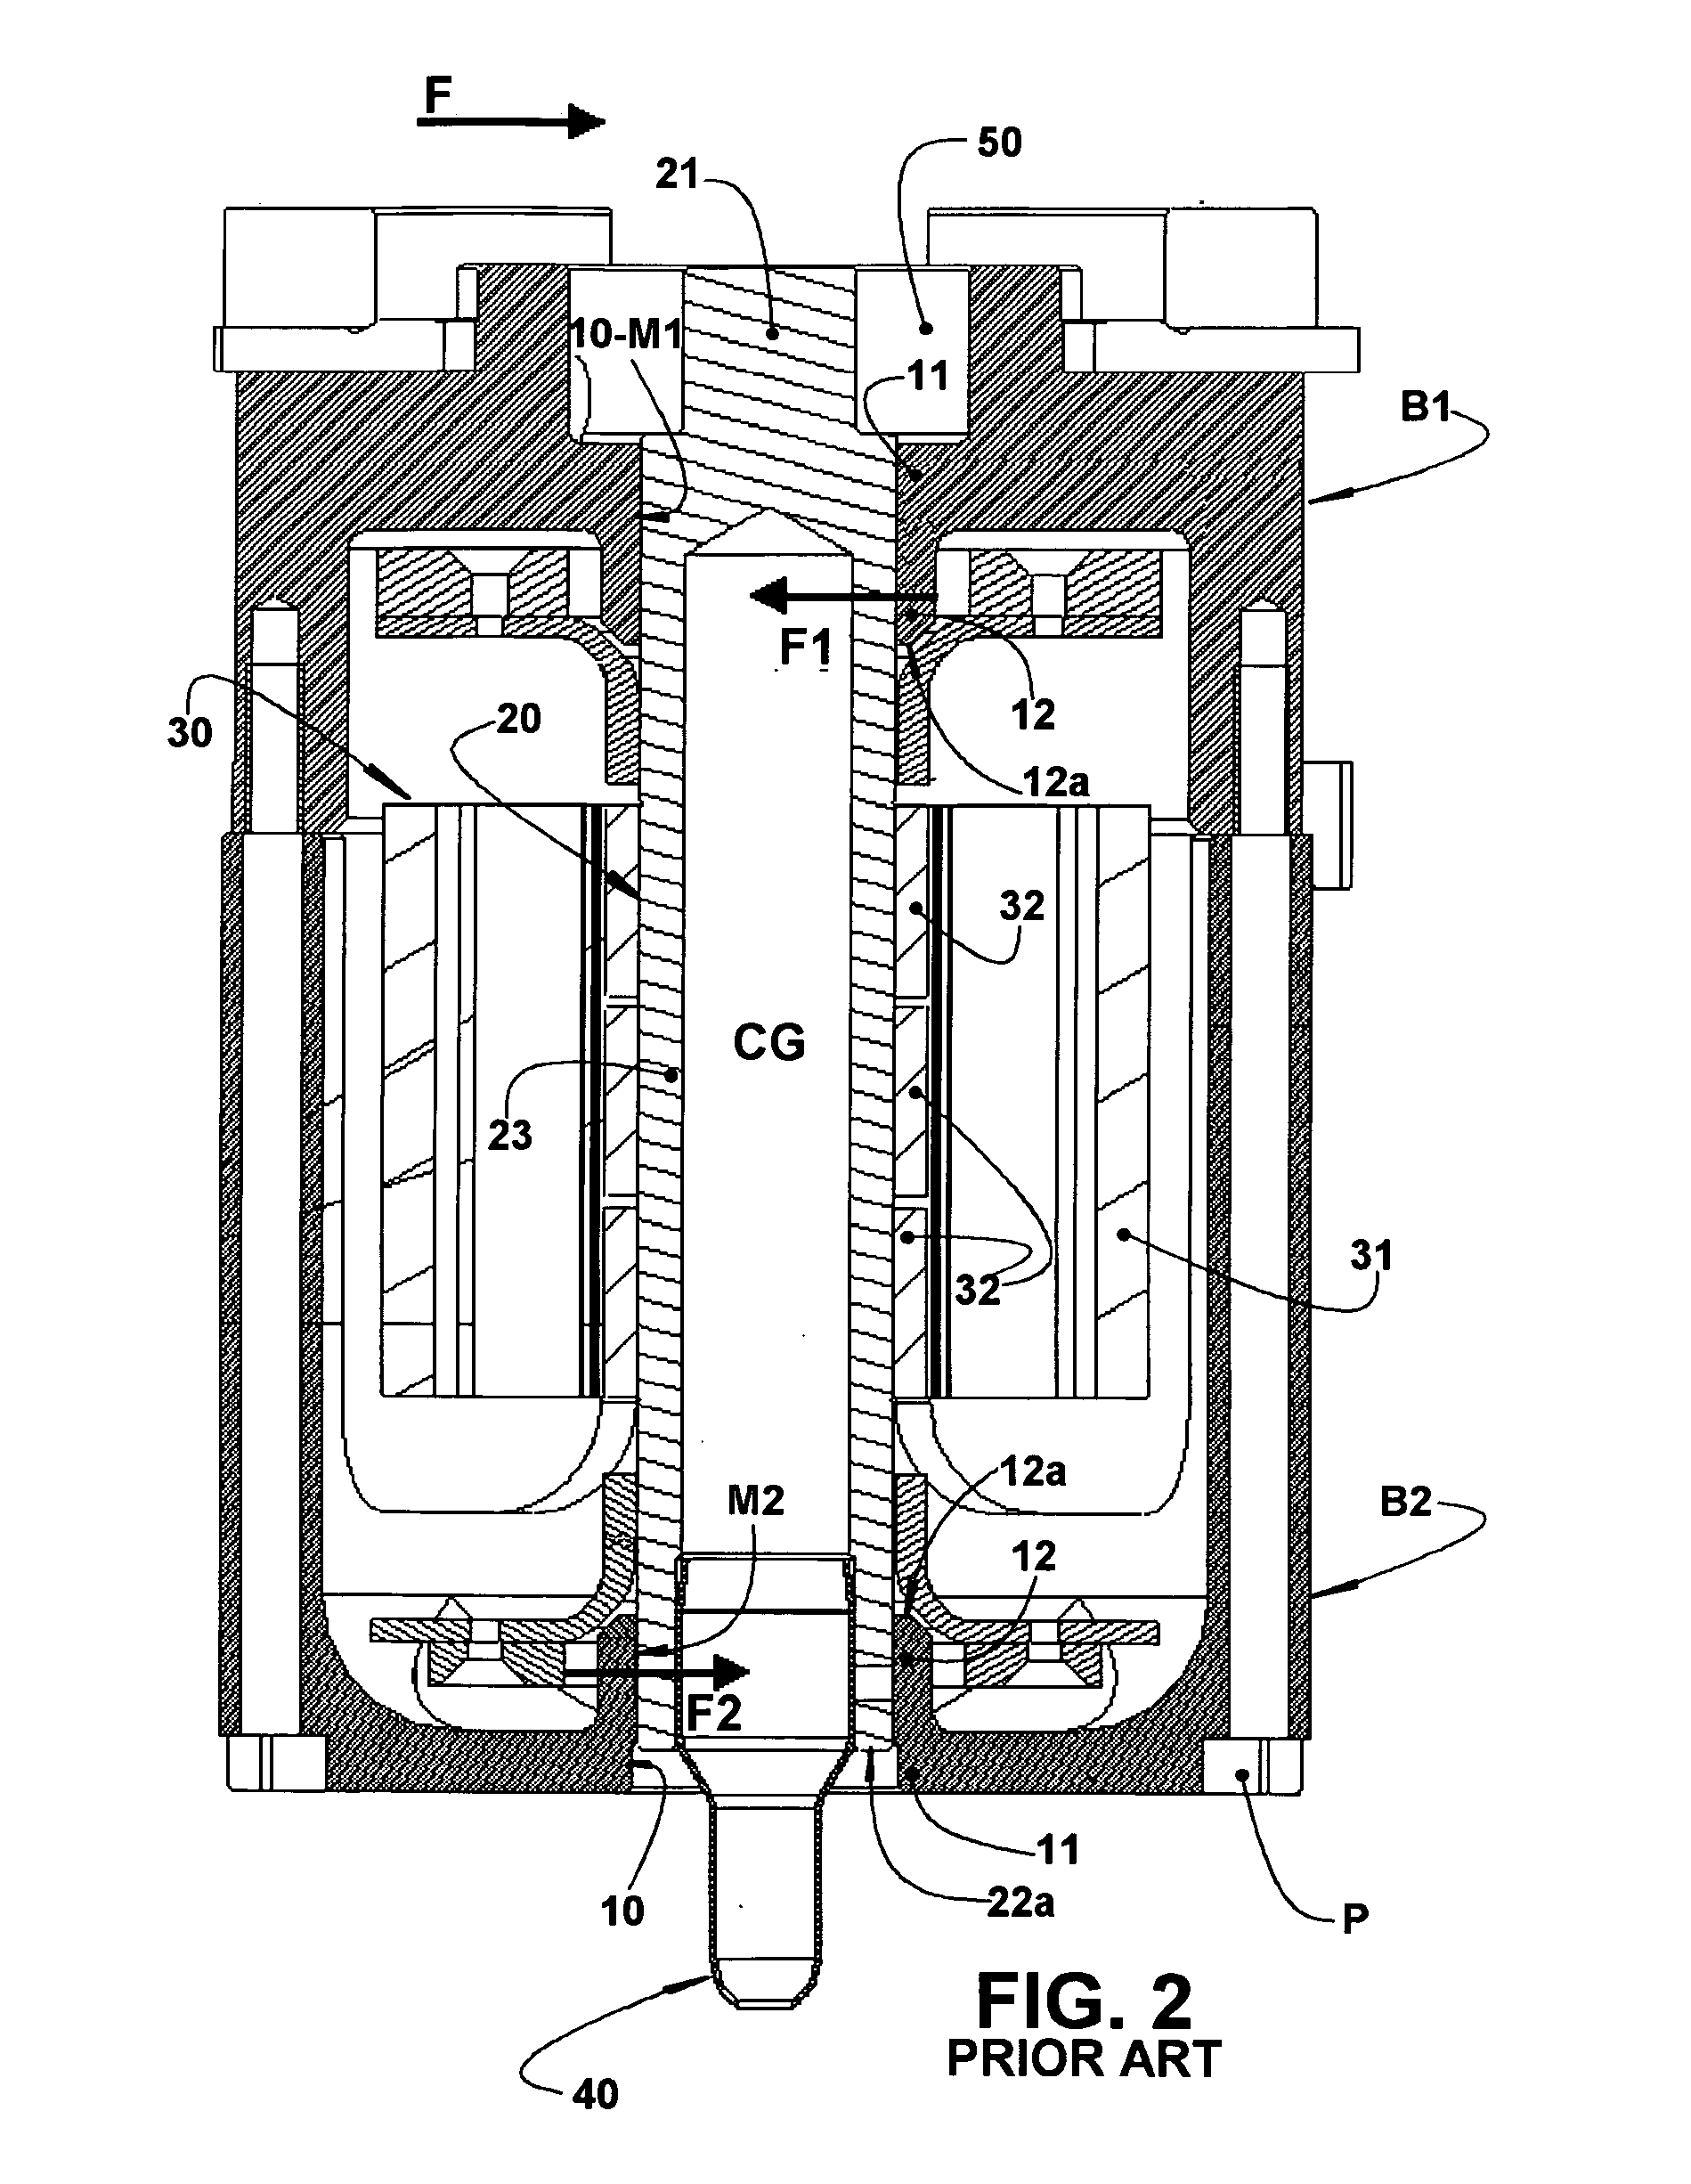 Mounting arrangement for an eccentric shaft in a refrigeration compressor